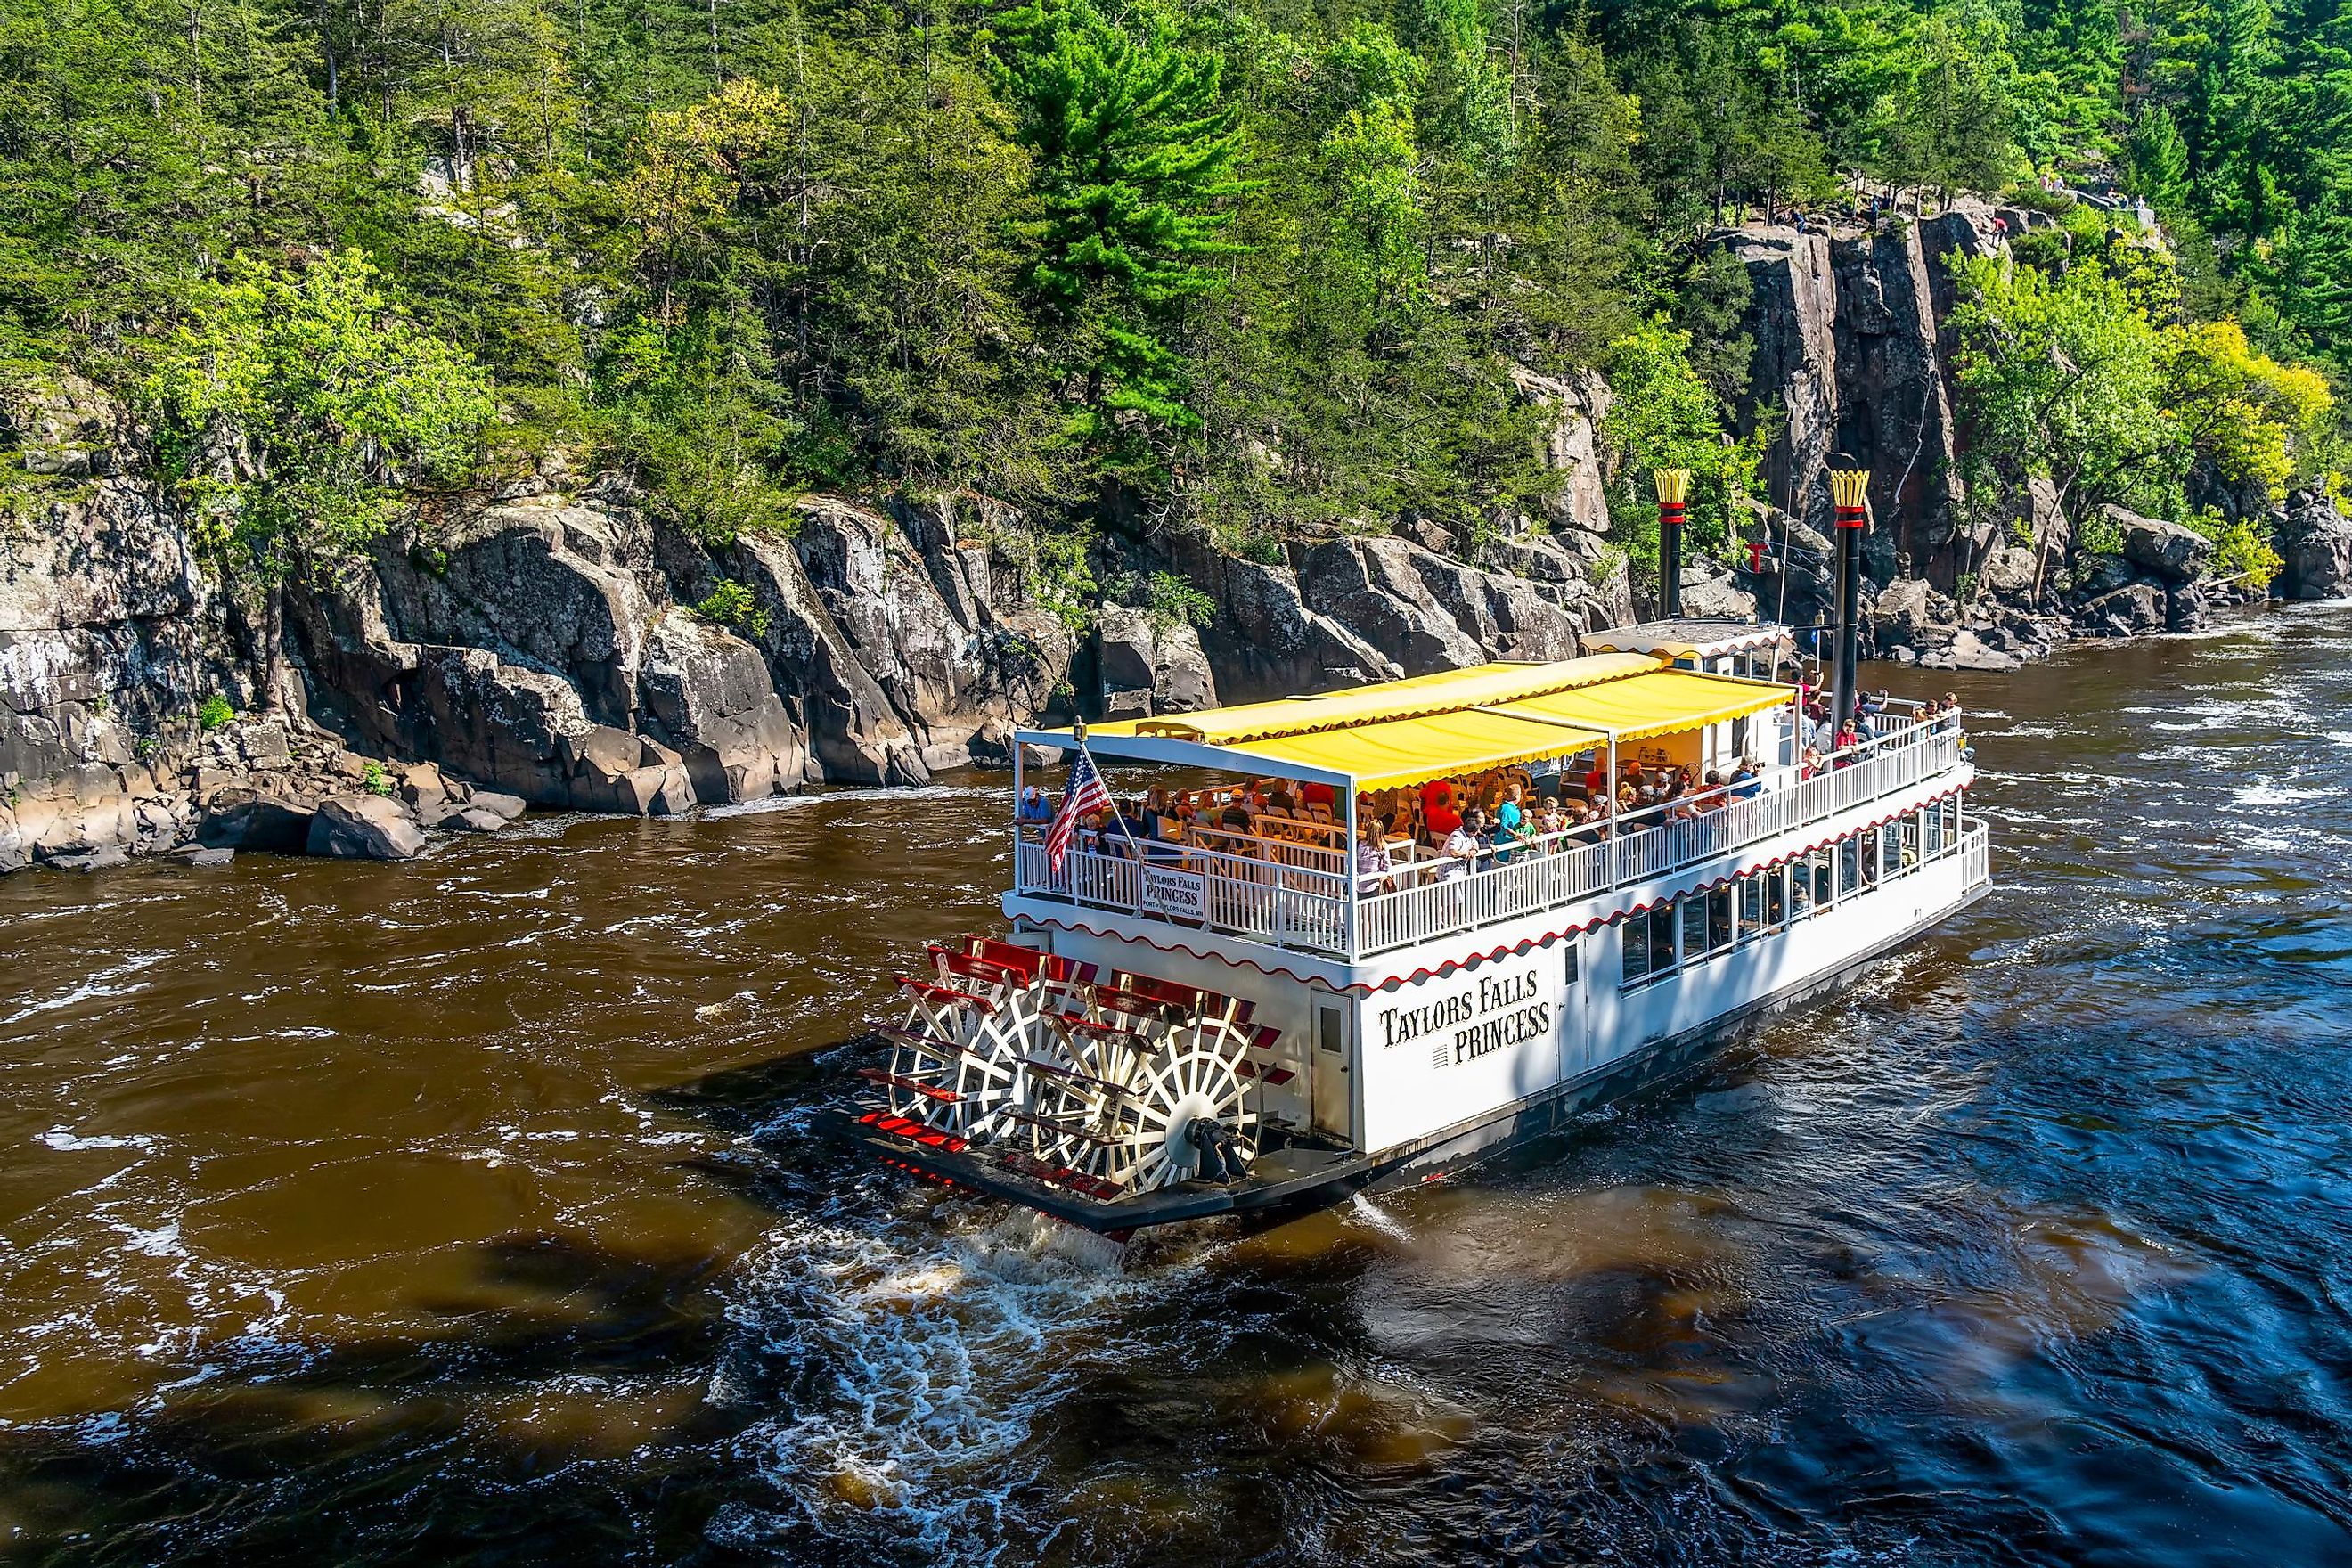 A cruise on the river at Taylors Falls, Minnesota.